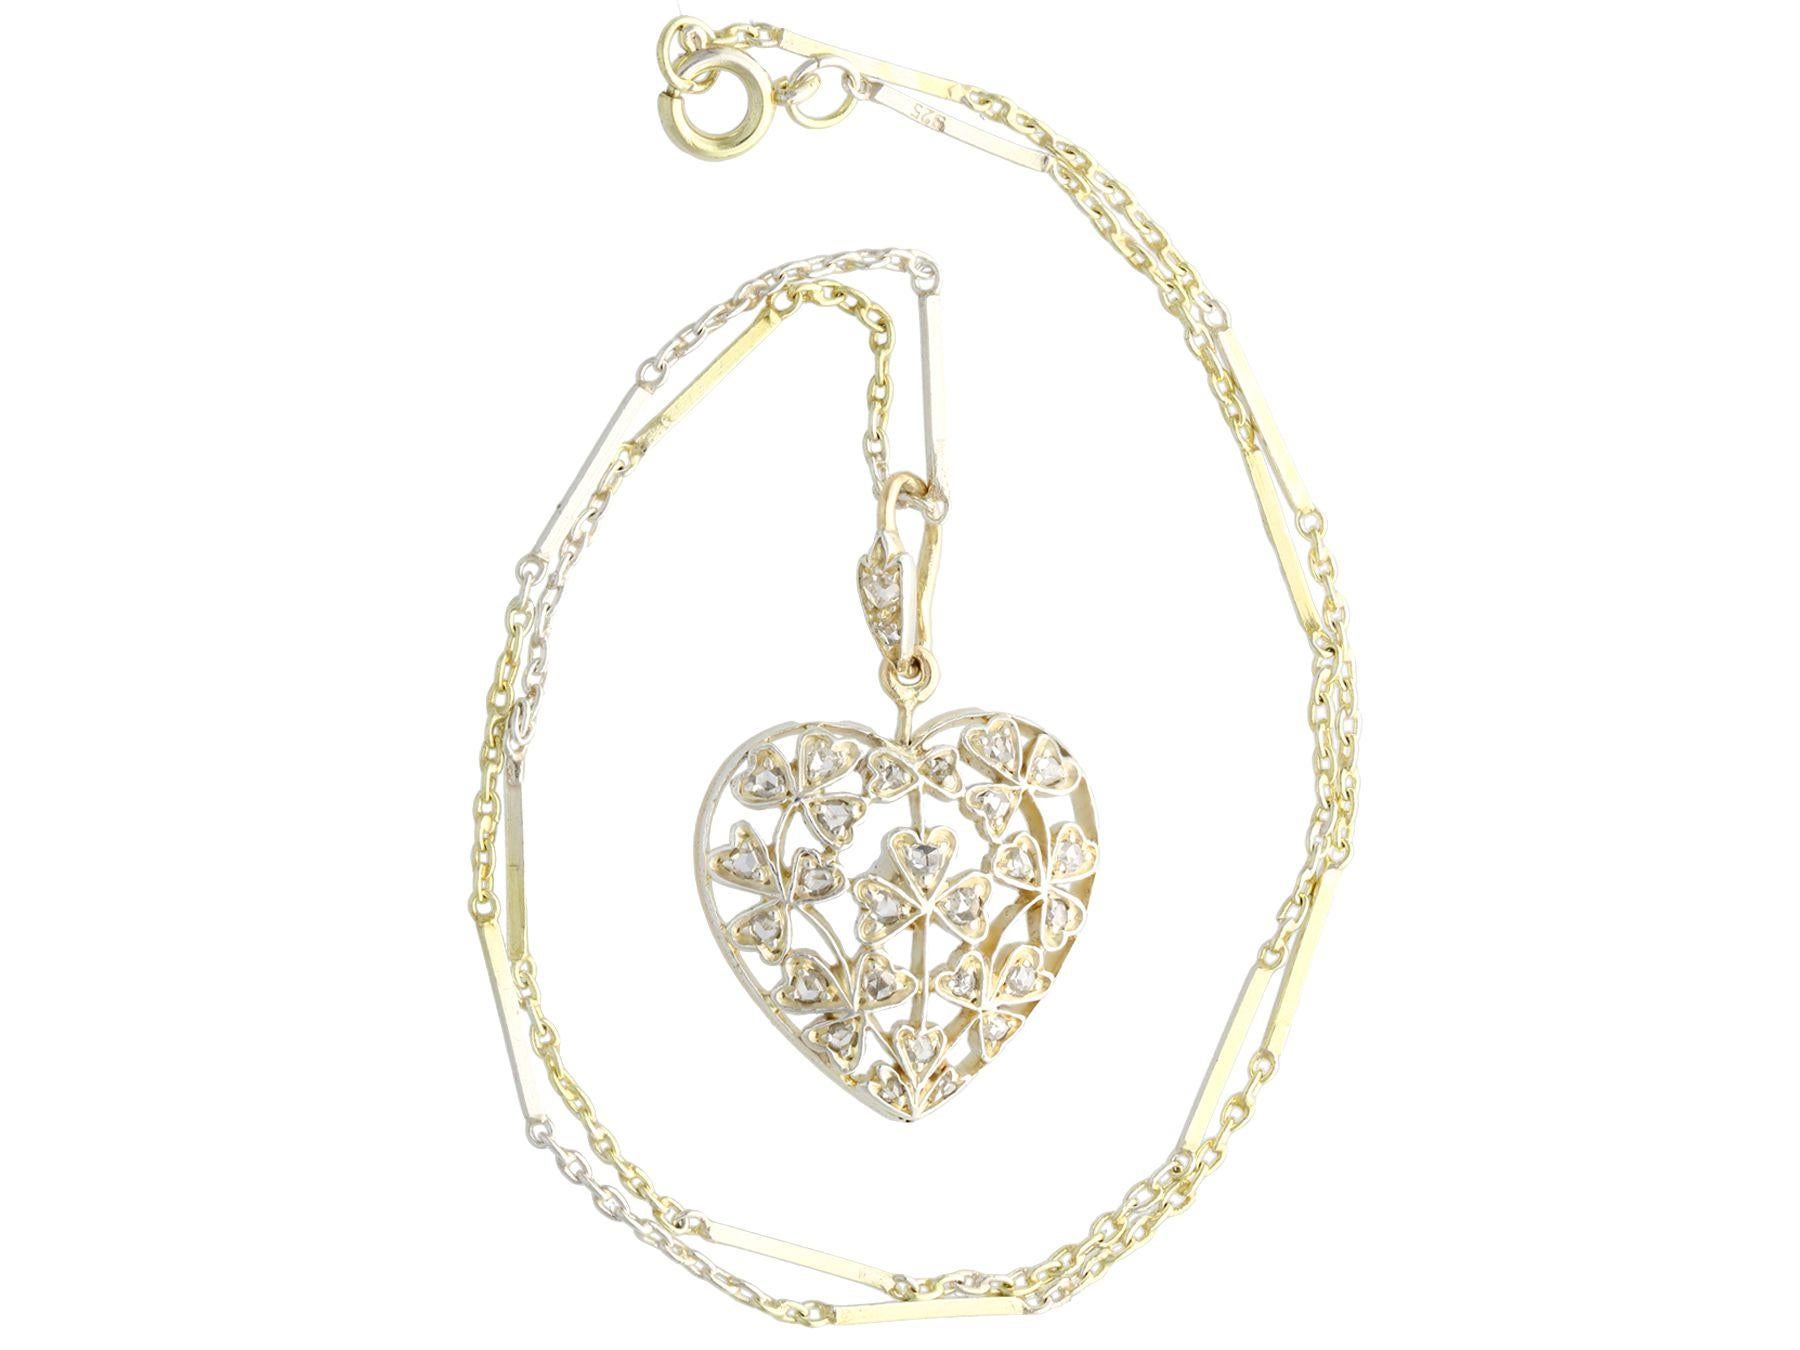 An exceptional, fine and impressive antique Victorian 0.70 carat diamond and 12 karat yellow gold, silver set heart shaped pendant; part of our diverse antique jewelry and estate jewelry collections.

This exceptional, fine and impressive diamond